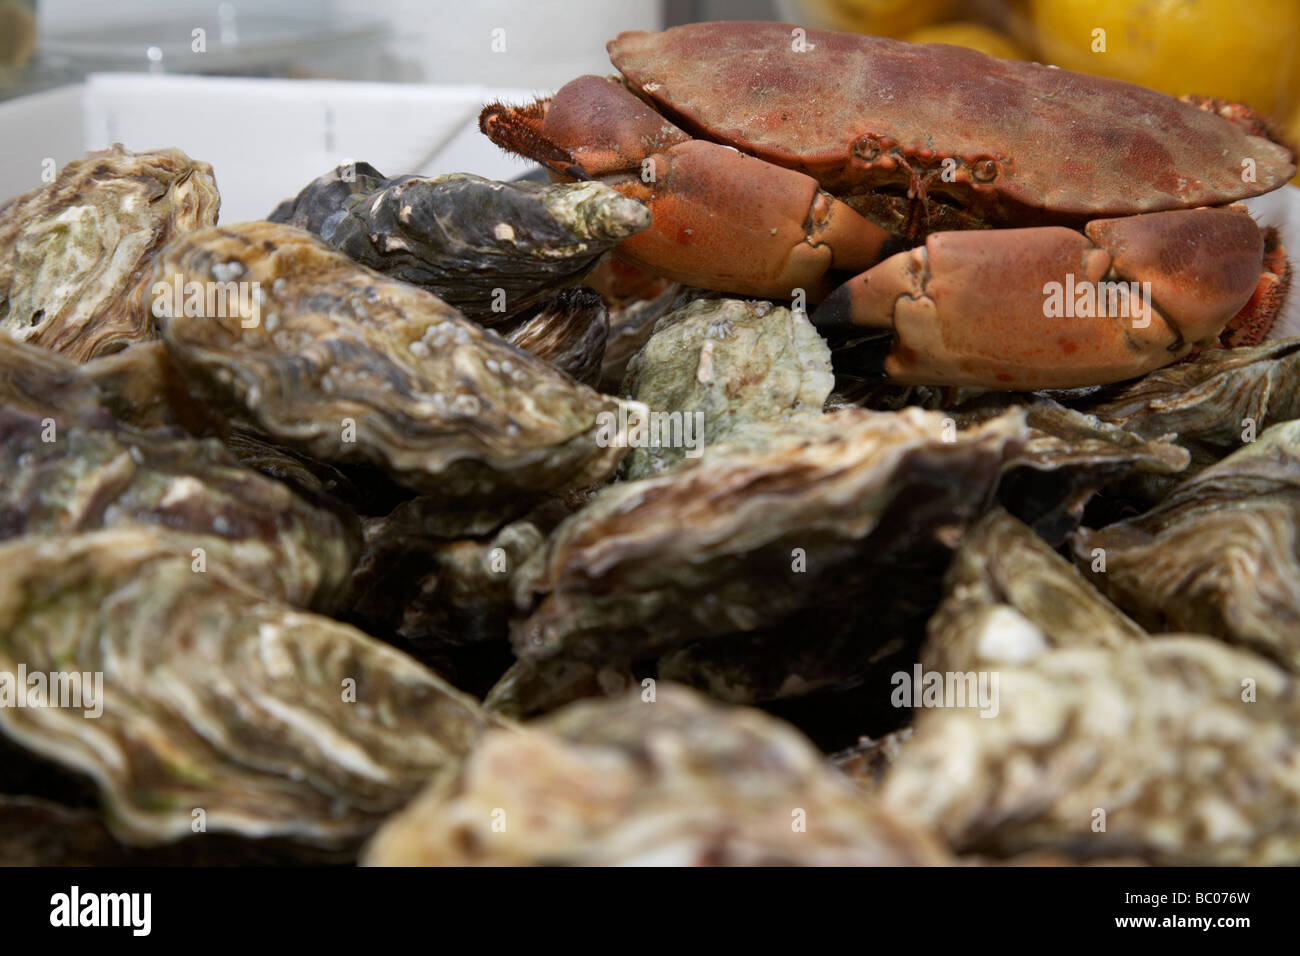 oysters and edible red crab on a shellfish and seafood stall at an open market in ireland Stock Photo